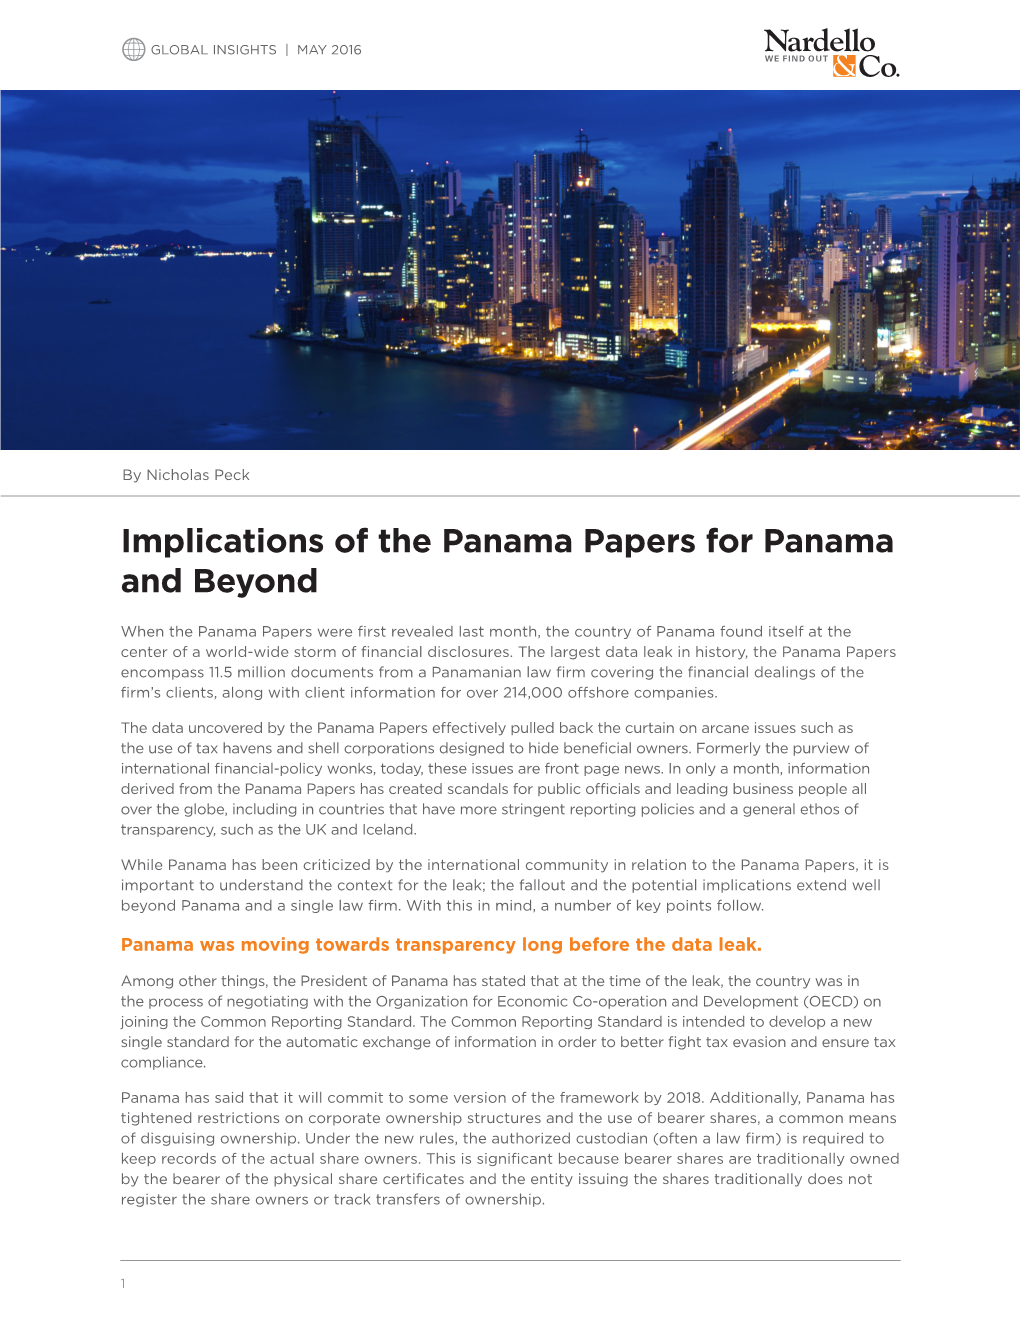 Implications of the Panama Papers for Panama and Beyond